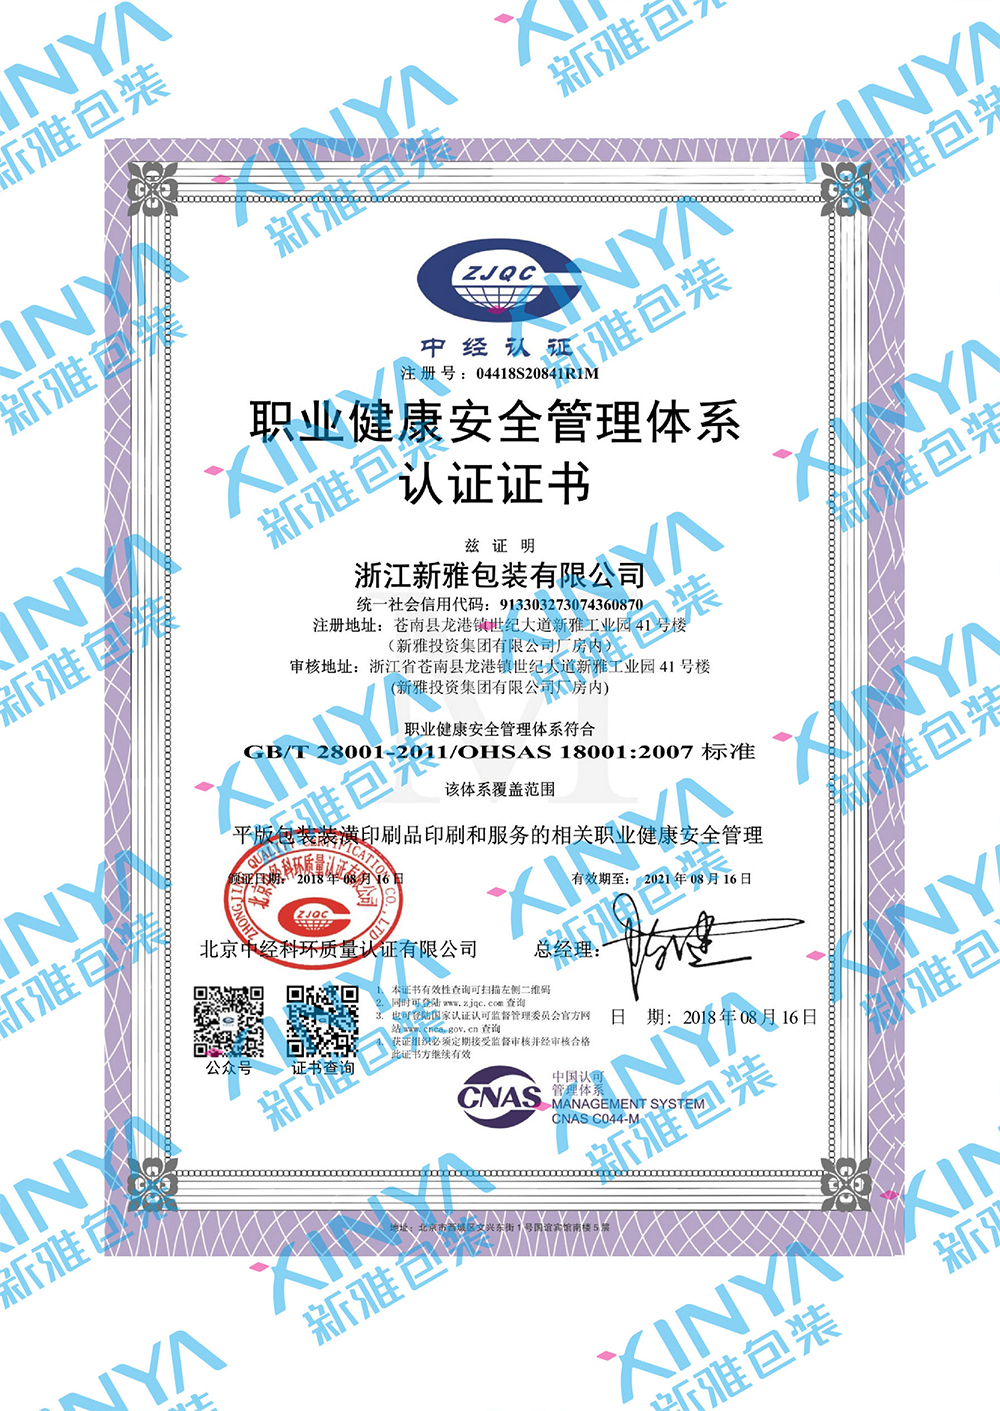 Certificate of occupational health and safety management system